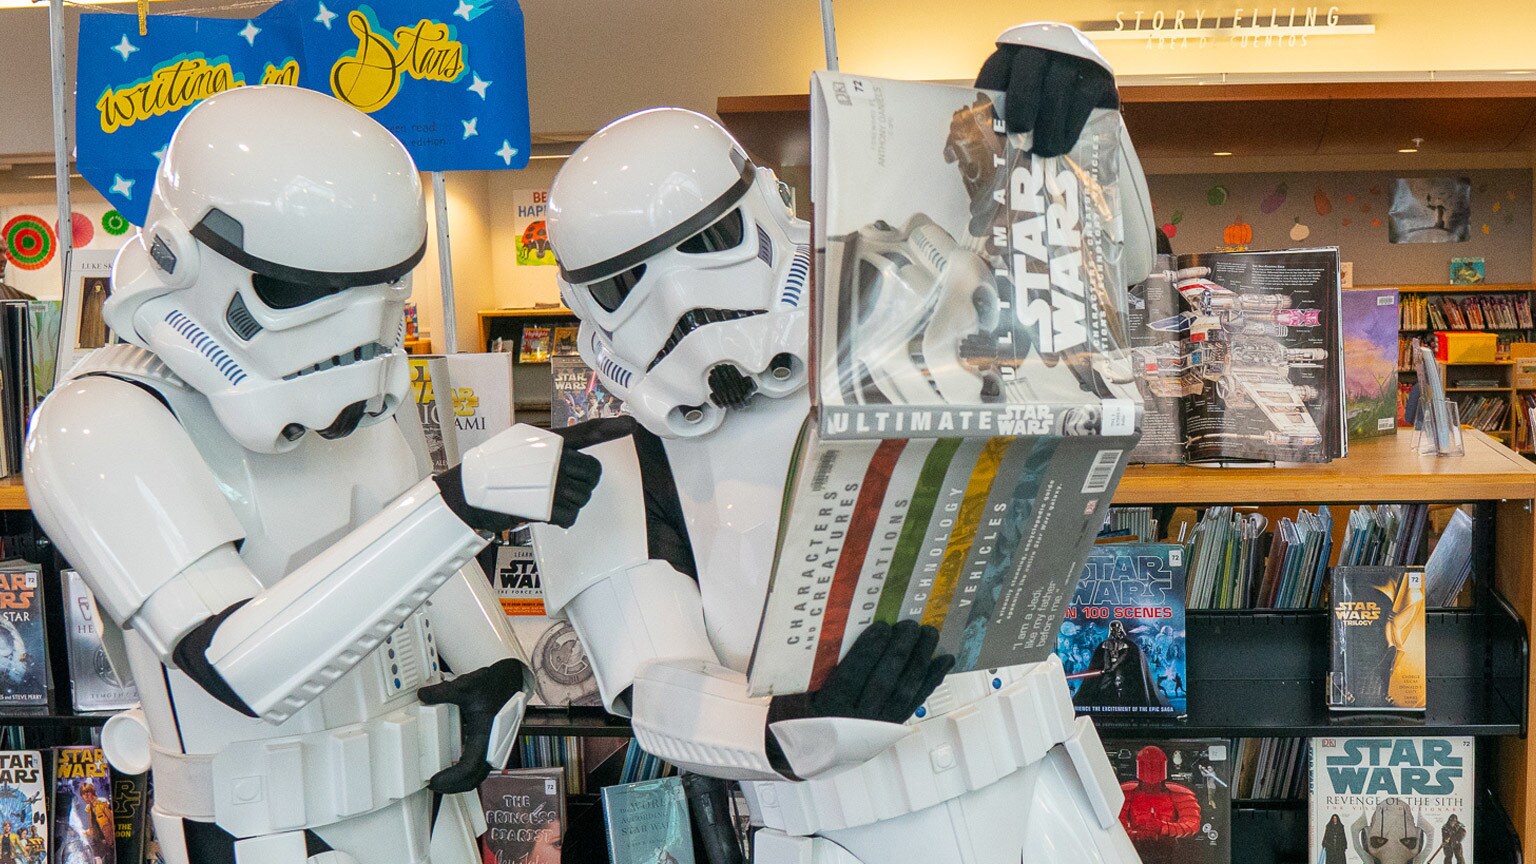 Star Wars Reads: Bringing the Power of the Force to Libraries